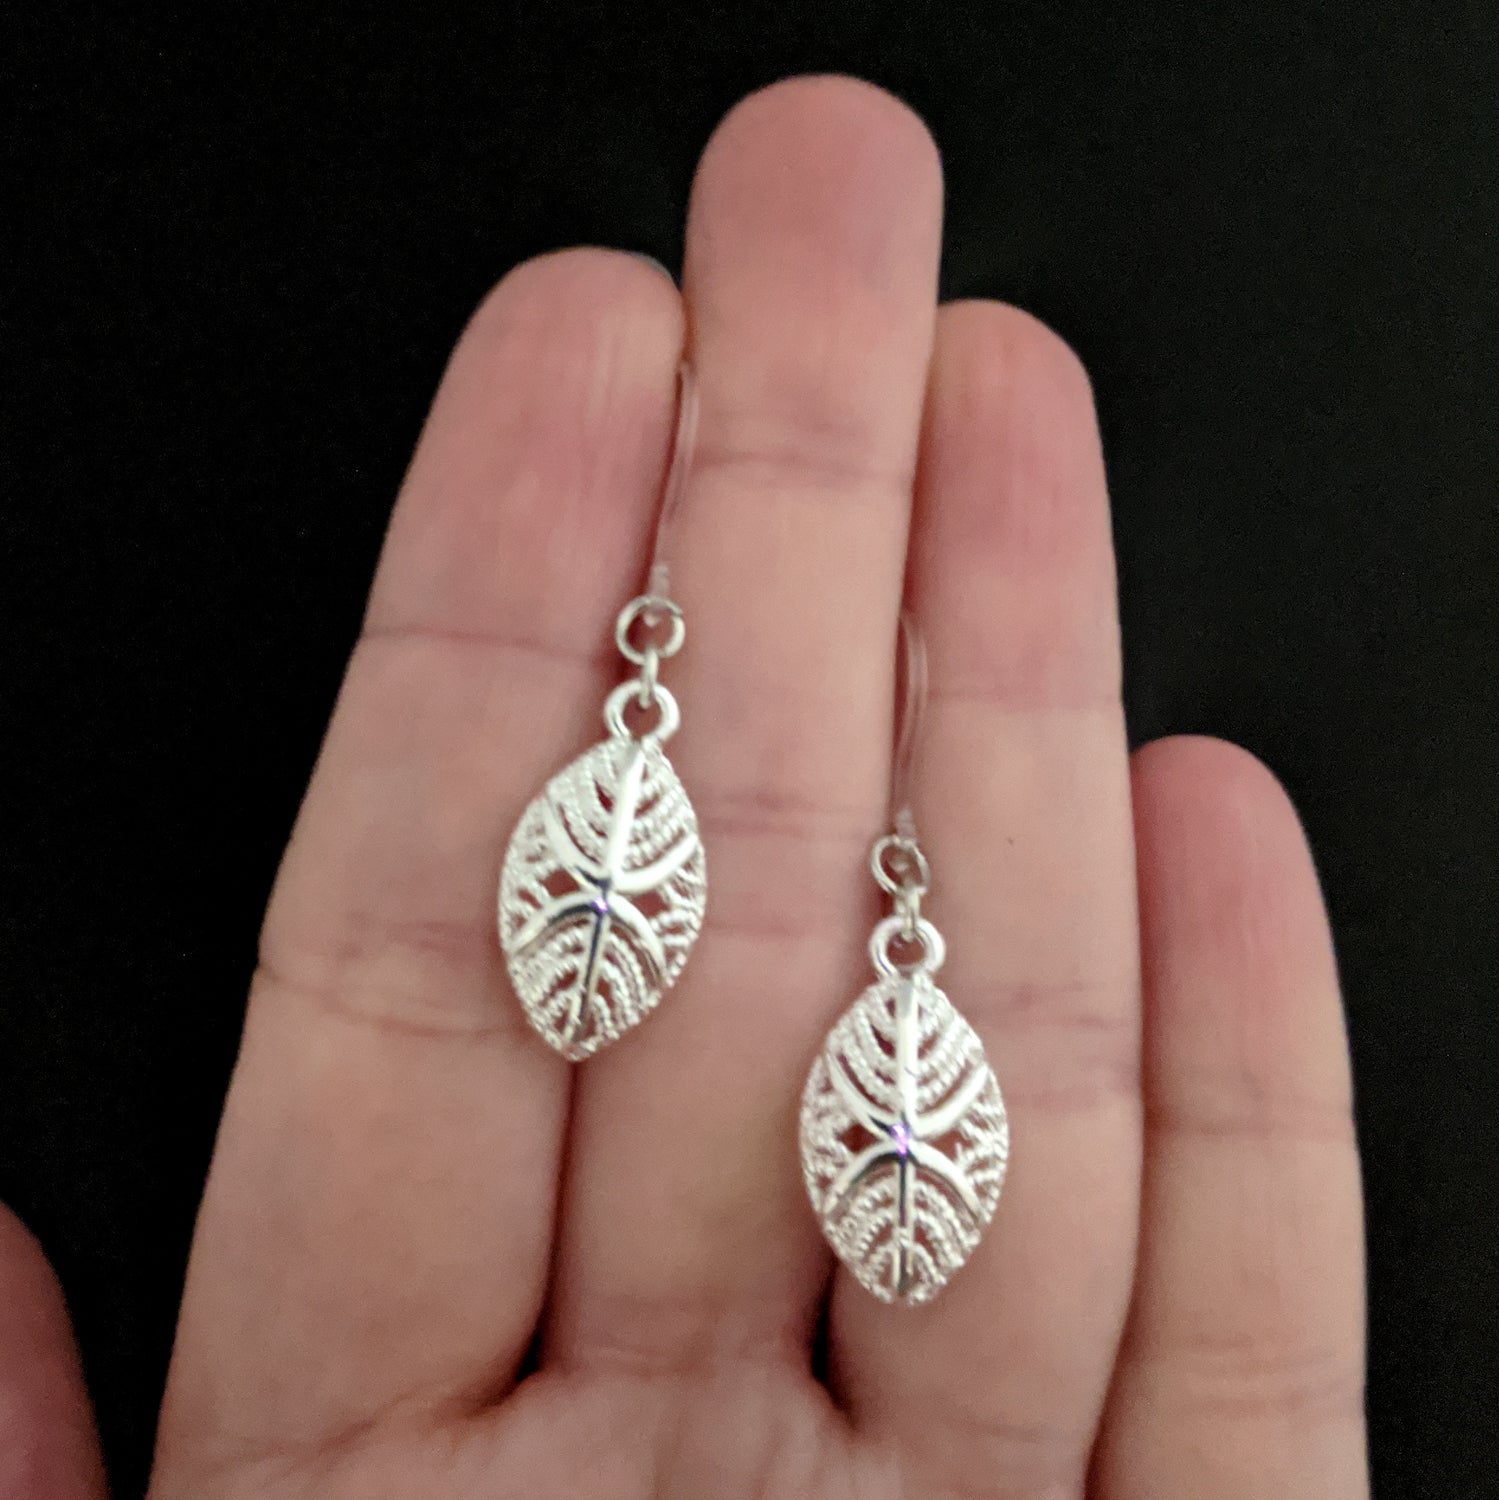 Silver African Mask Earrings (Dangles) - size comparison hand